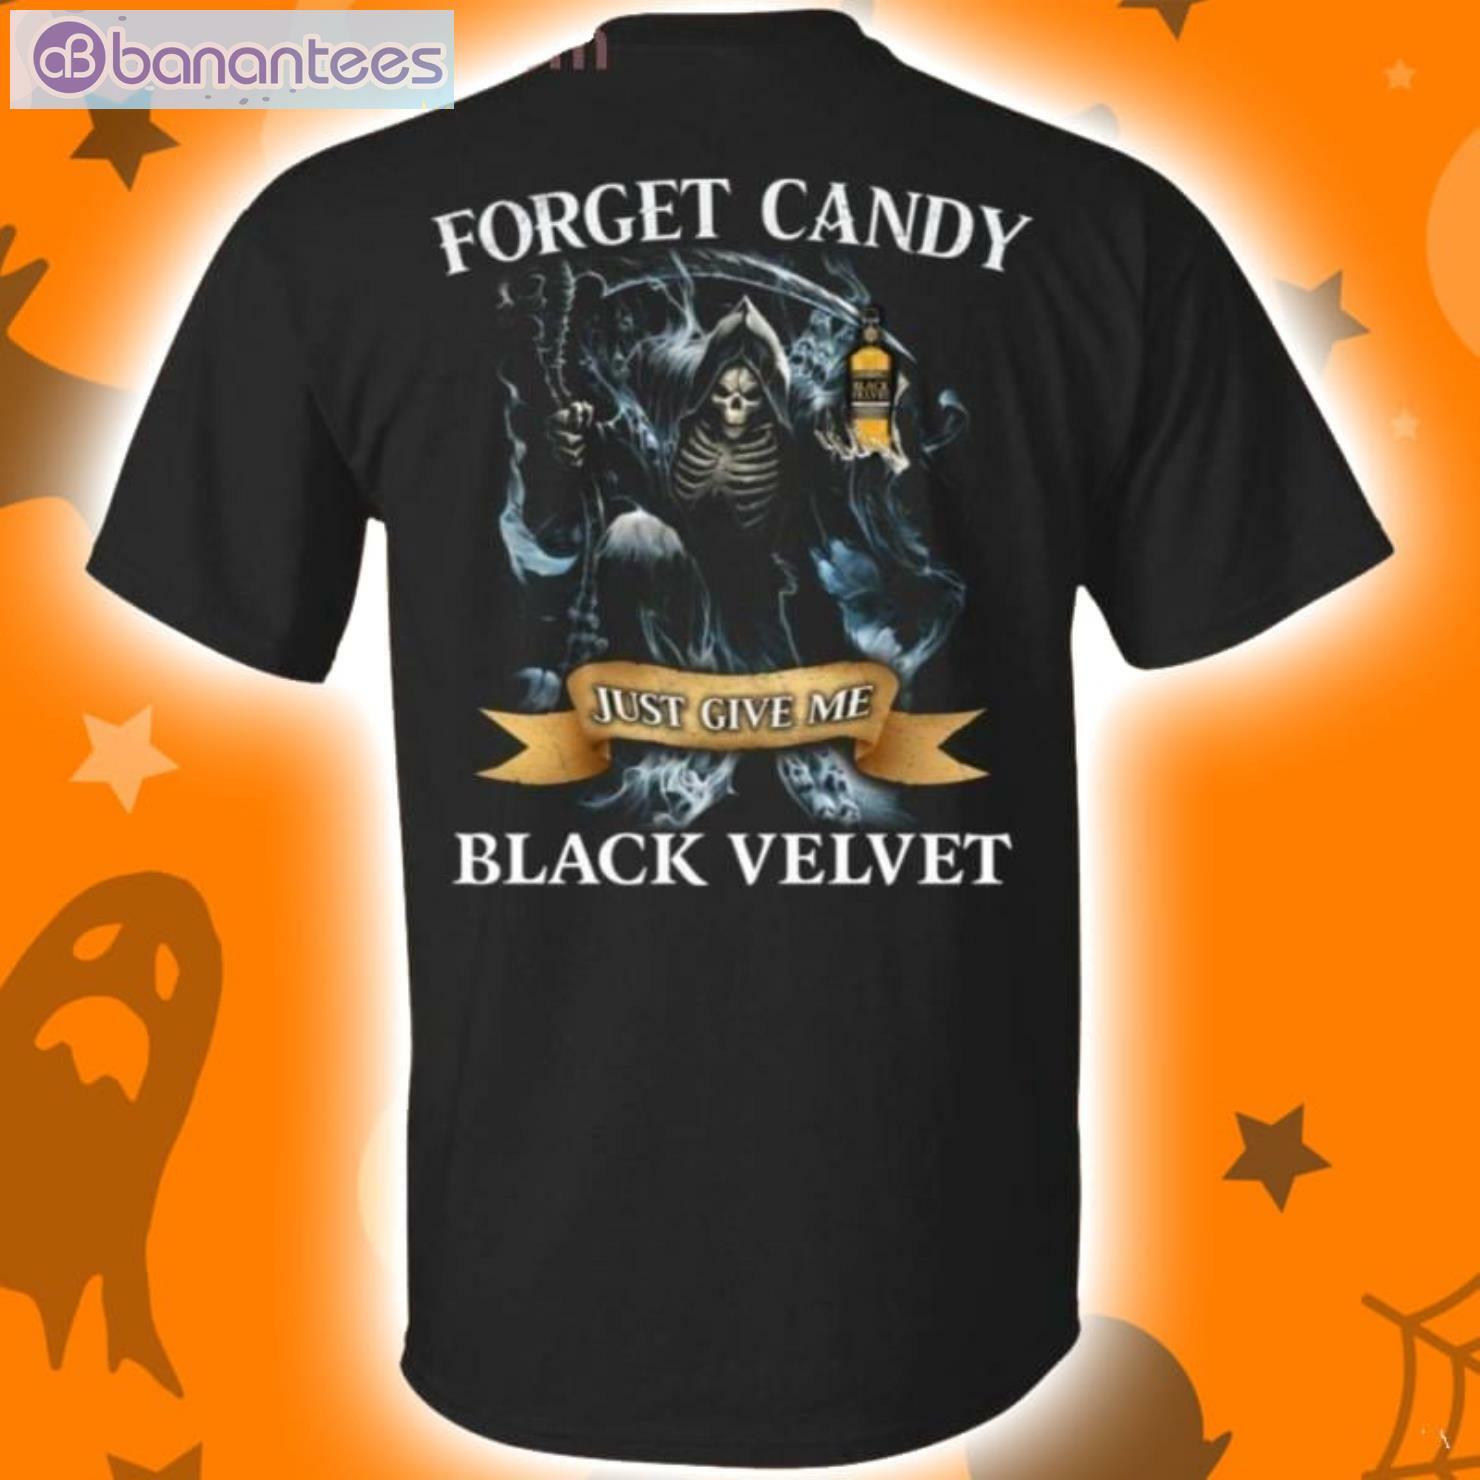 Forget Candy Just Give Me Velvet Canadian Whiskey Halloween T-Shirt Product Photo 1 Product photo 1